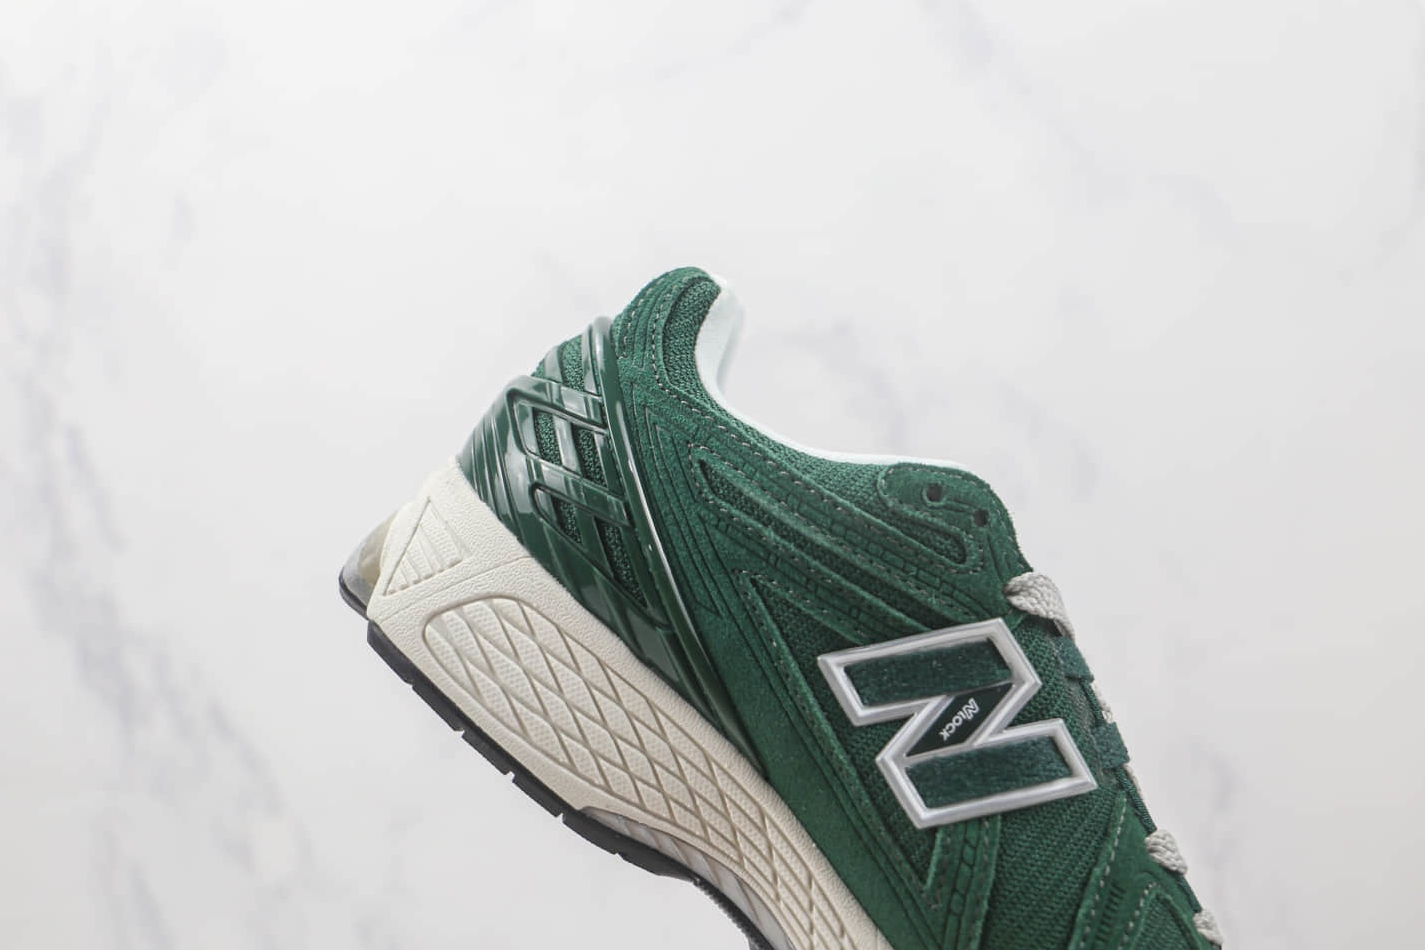 New Balance 1906R 'Nightwatch Green' M1906RX - Sneakers for Nighttime Style